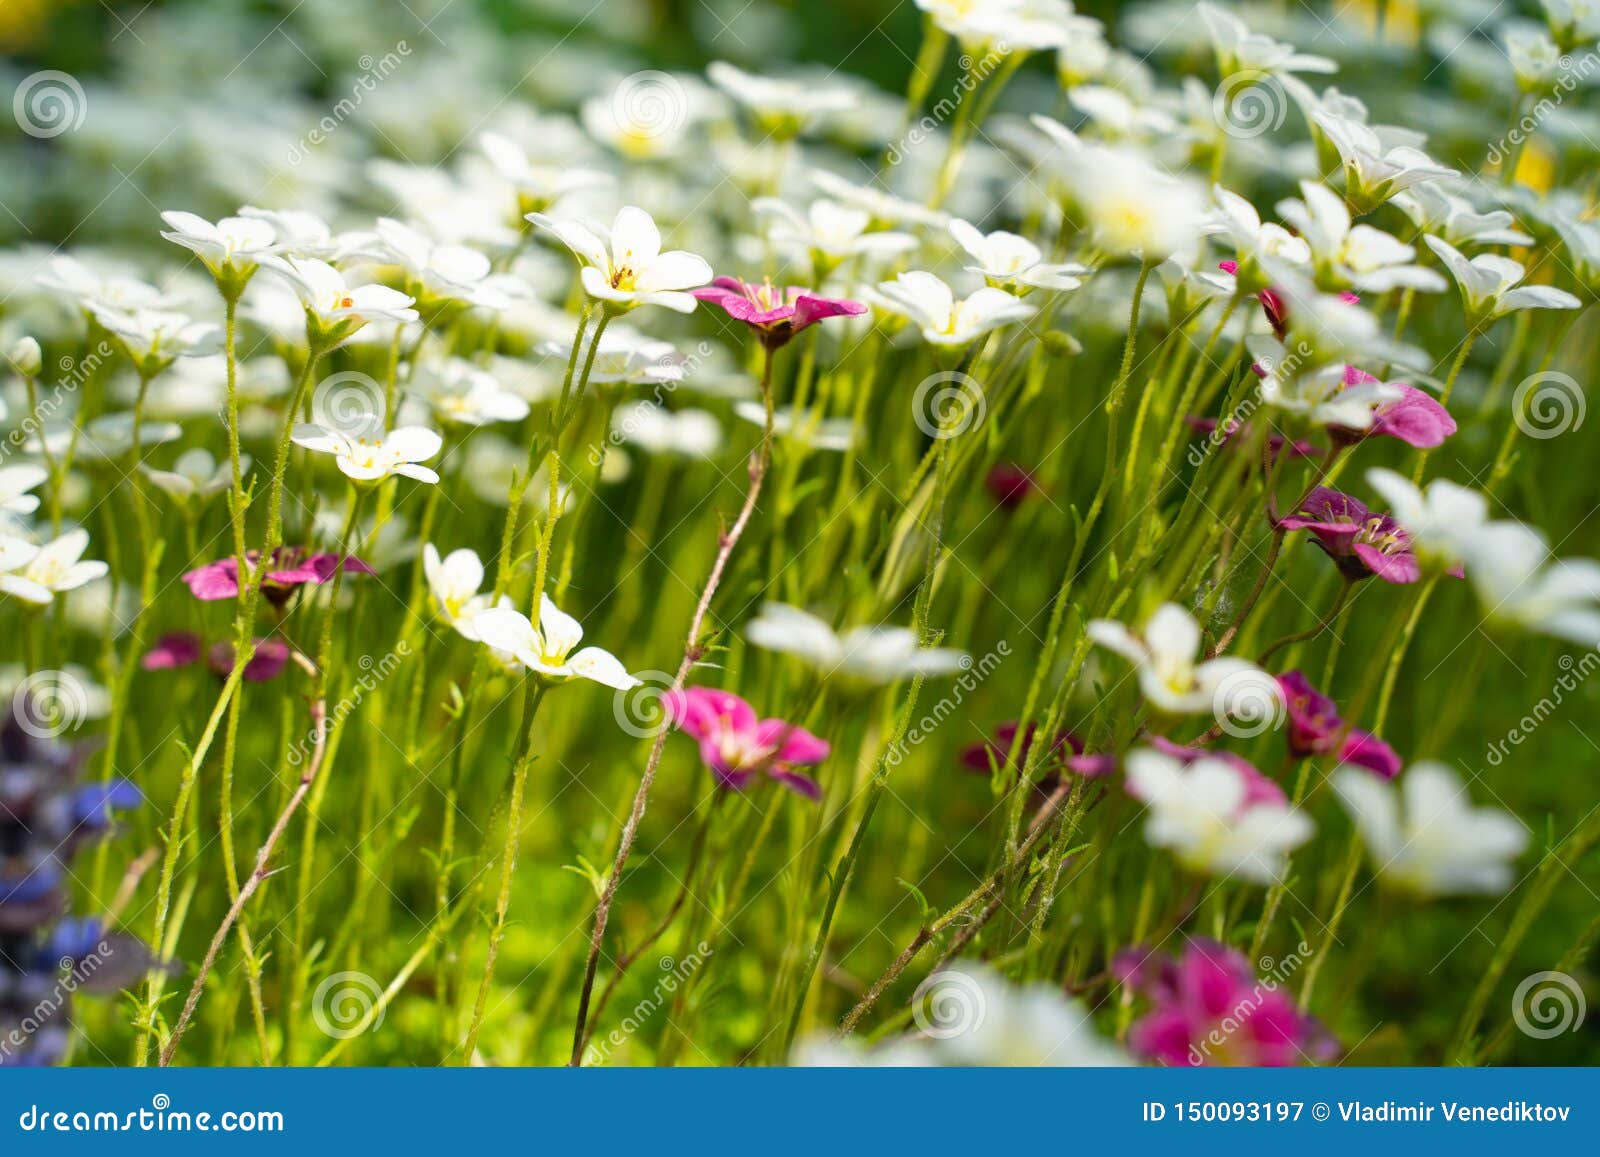 Lobularia Alyssum Flowers In The Flower Bed Decorative Plants Of The Botanical Garden Stock Image Image Of Background Beds 150093197